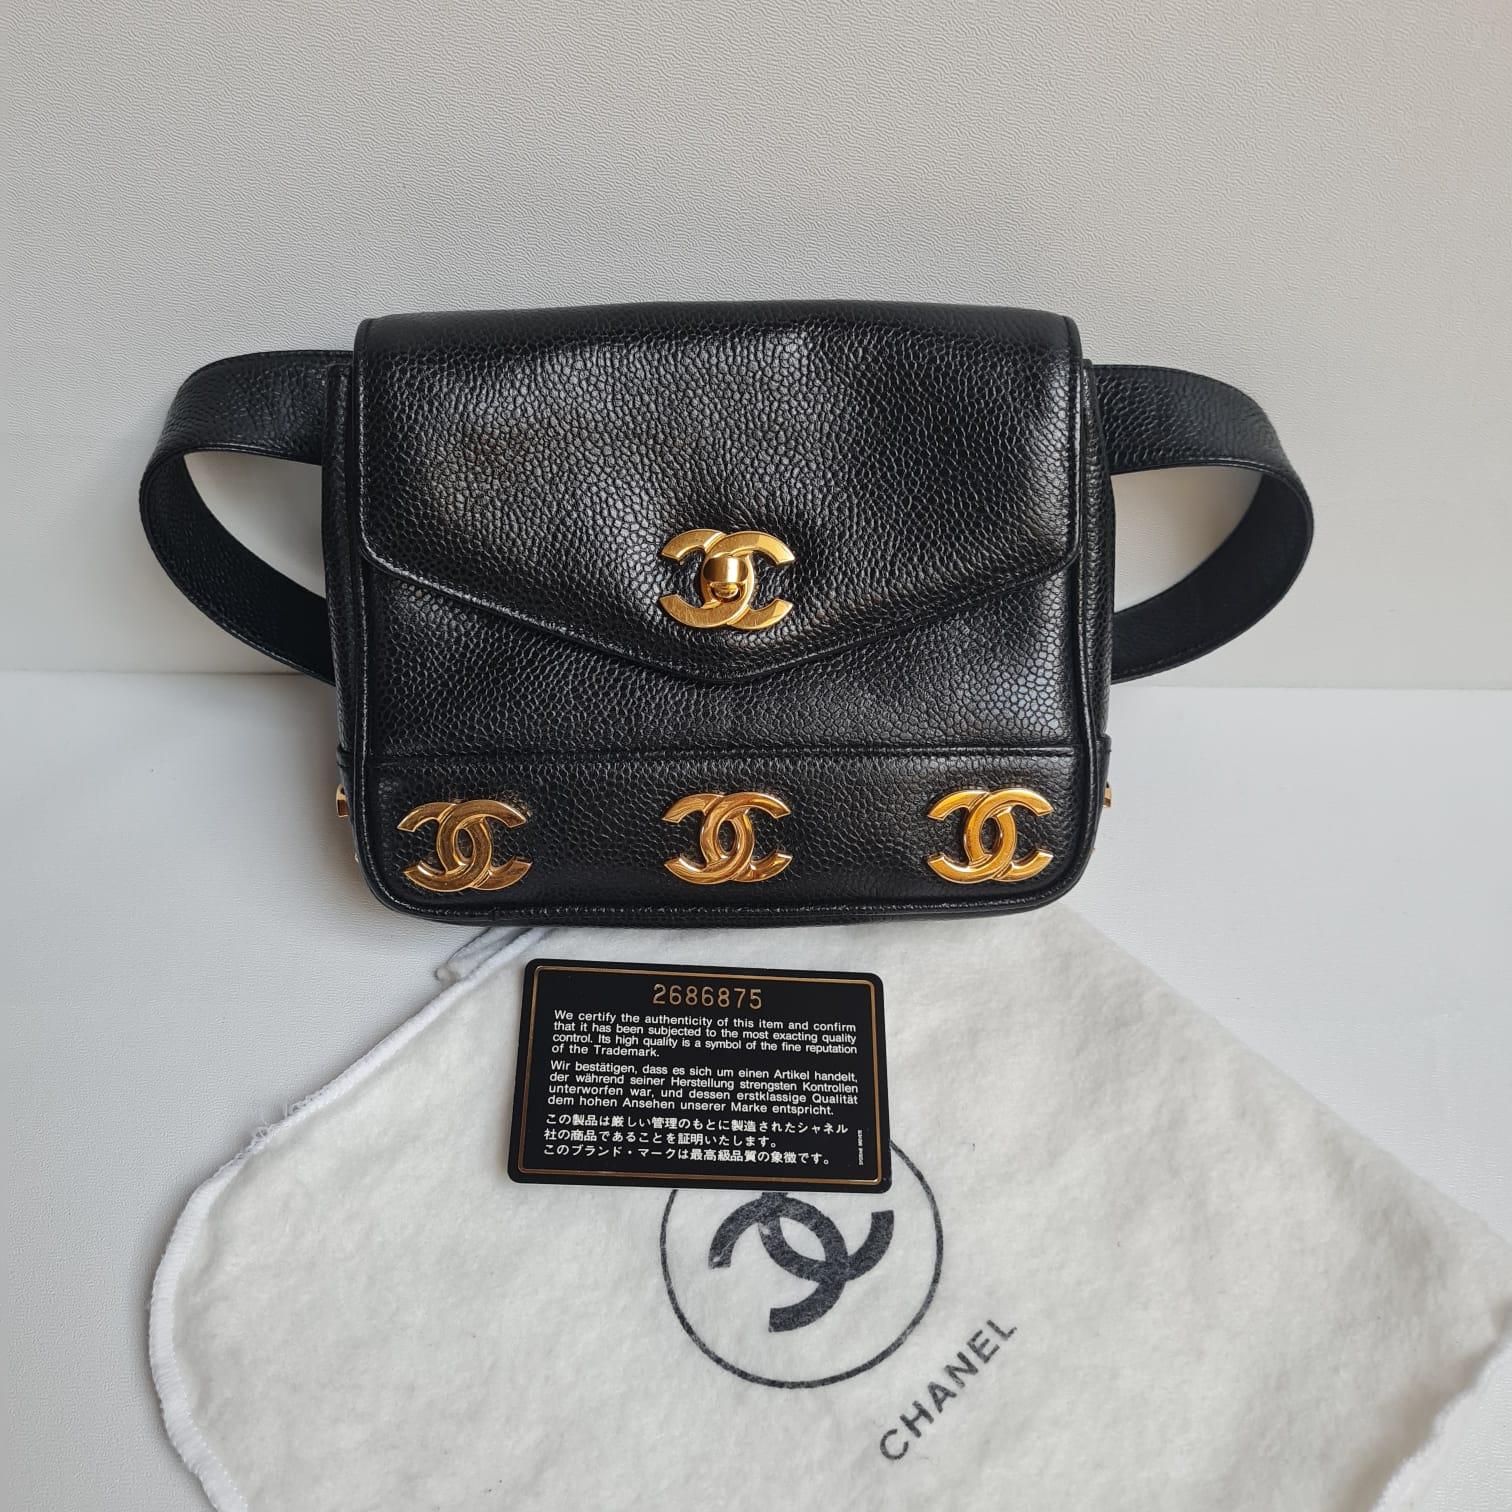 Super rare vintage belt bag in black caviar leather. Item shows slight signs of wear with very faint scuffs on the exterior surface and light marks on the hardwares. Note that the 'made in' stamp has completely rubbed off. Belt size 75. Comes with